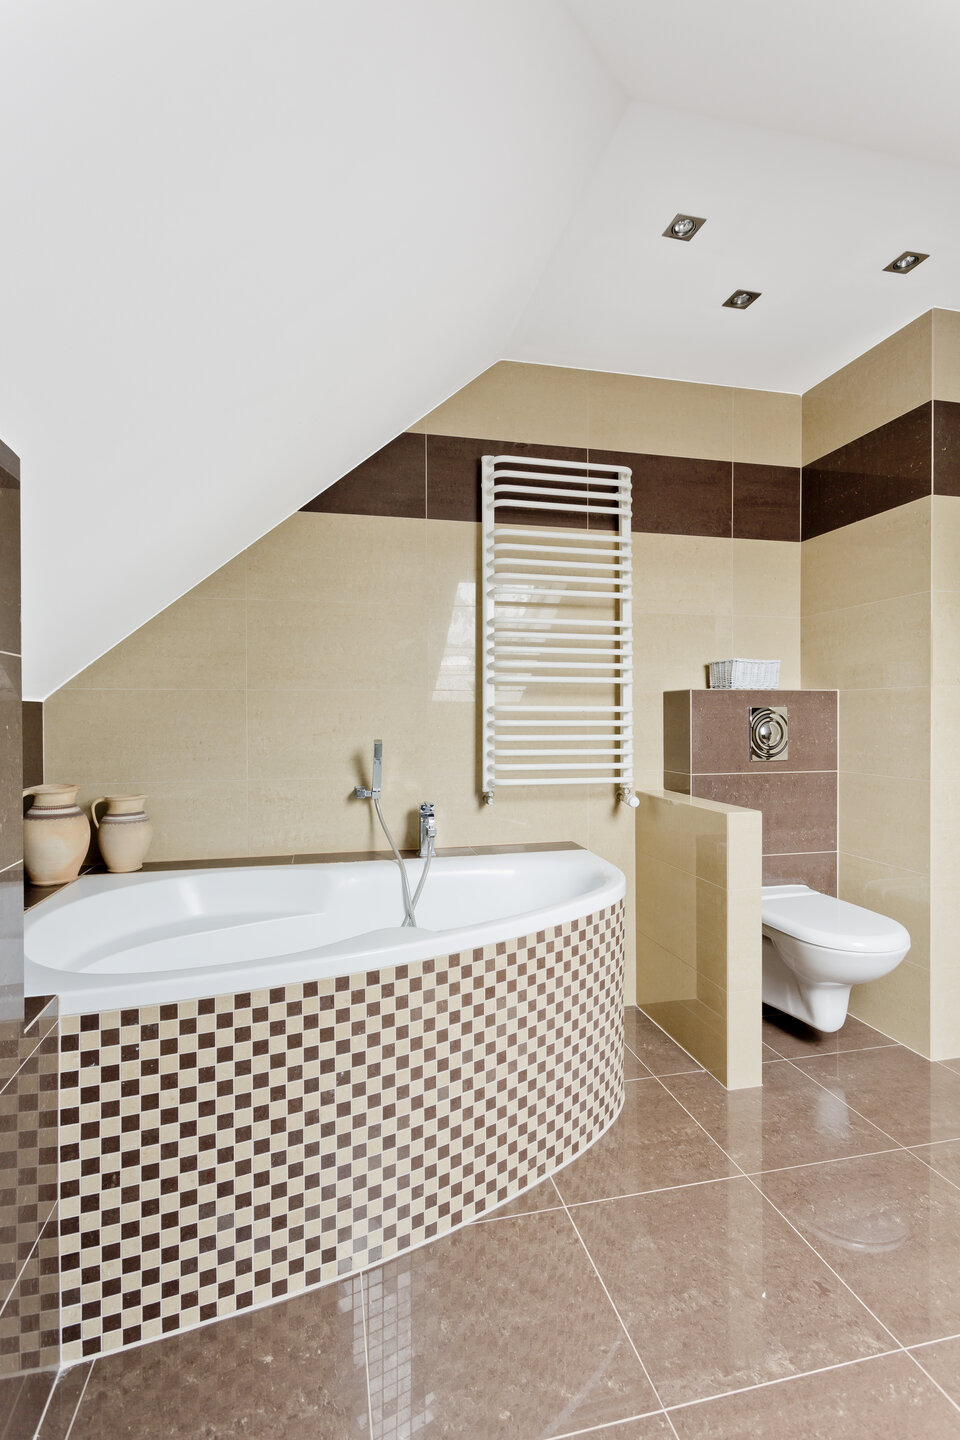 a side view from a pocelain tiled bathroom beige colour